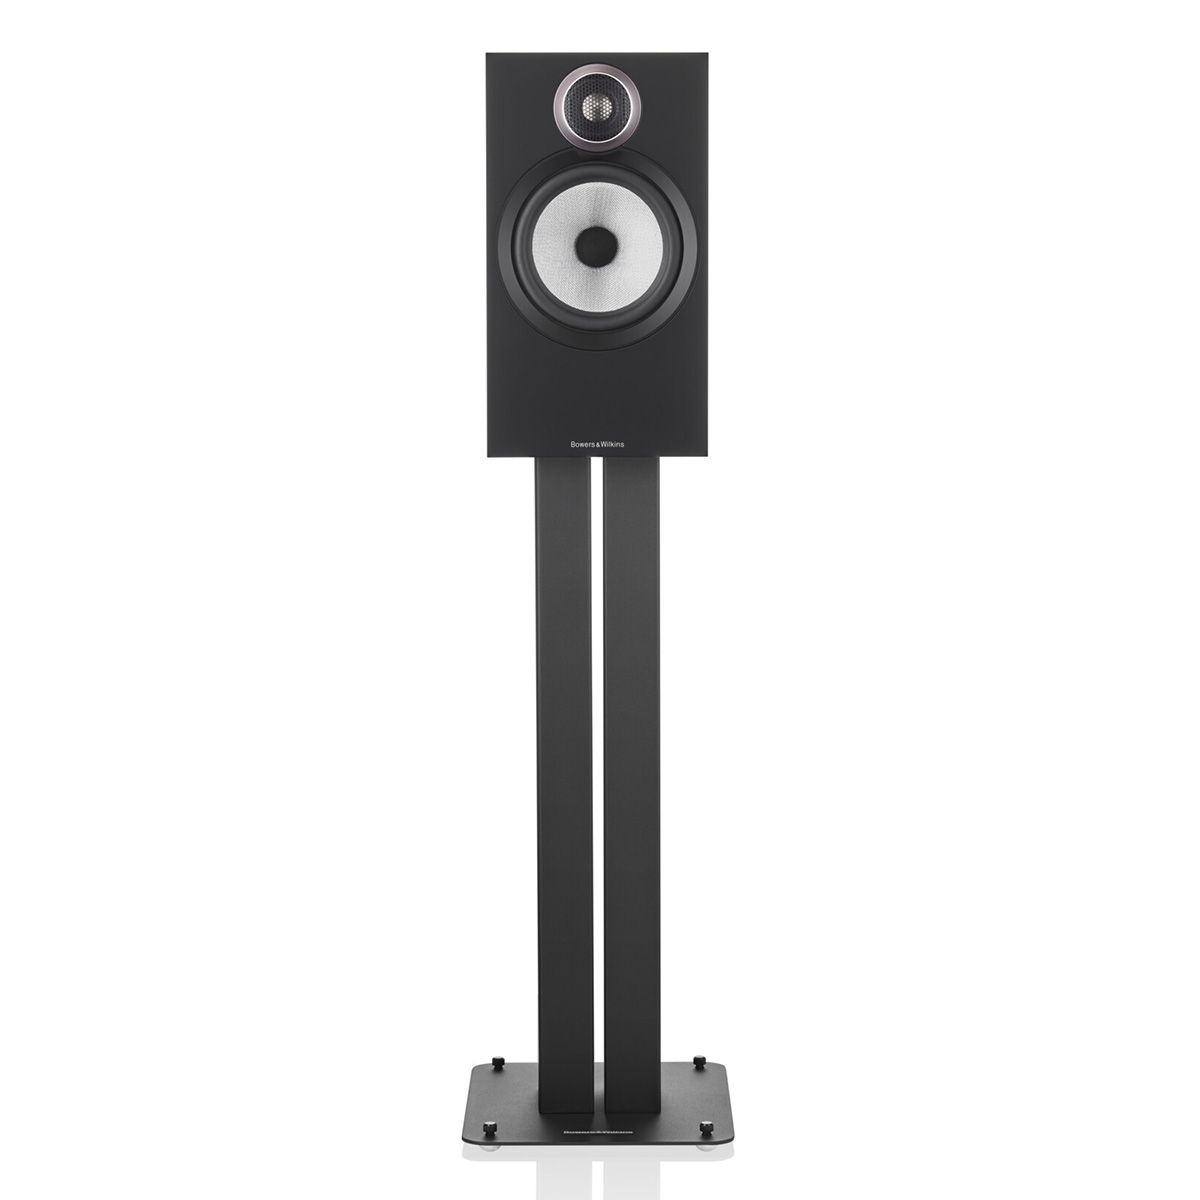 Black Bowers & Wilkins 606 S3 Stand-Mount Loudspeaker at an angle, without grille on stand